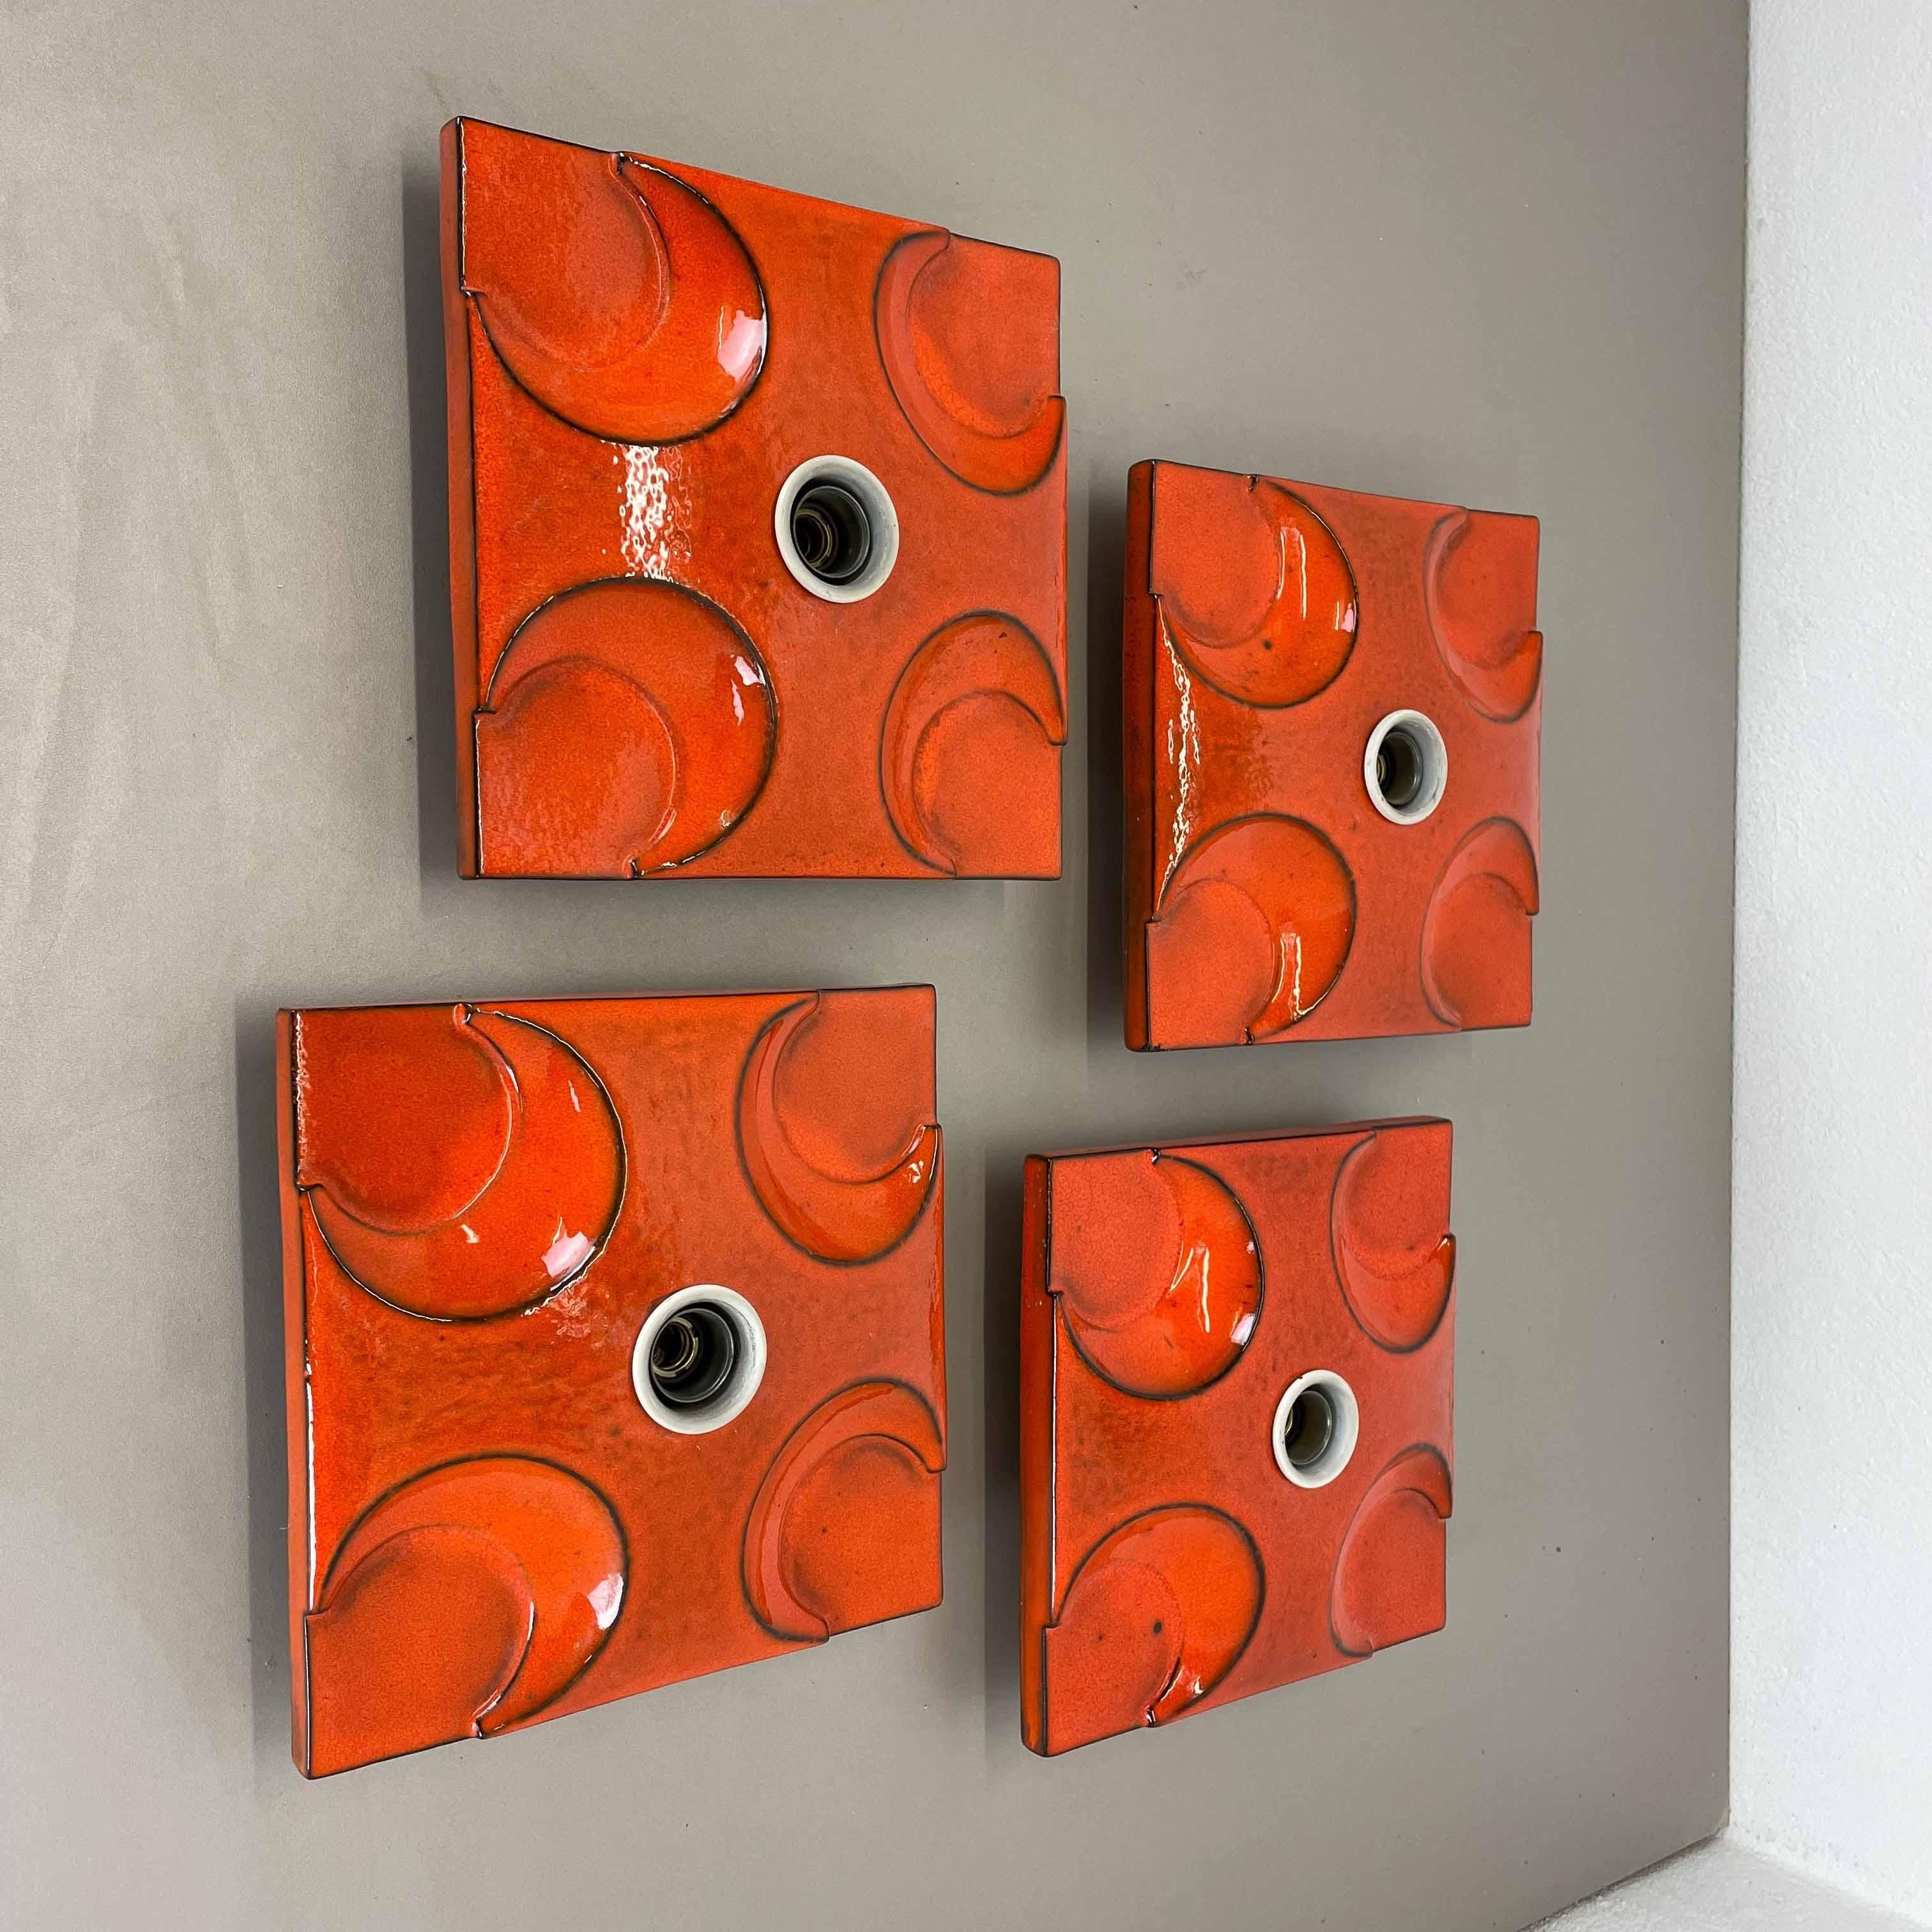 Article:

Wall light sconce set of four.


Producer:

Pan Ceramic, Germany.



Origin:

Germany.



Age:

1970s.



Description:

Original 1970s modernist German wall light made of ceramic in fat lava optic. This super rare